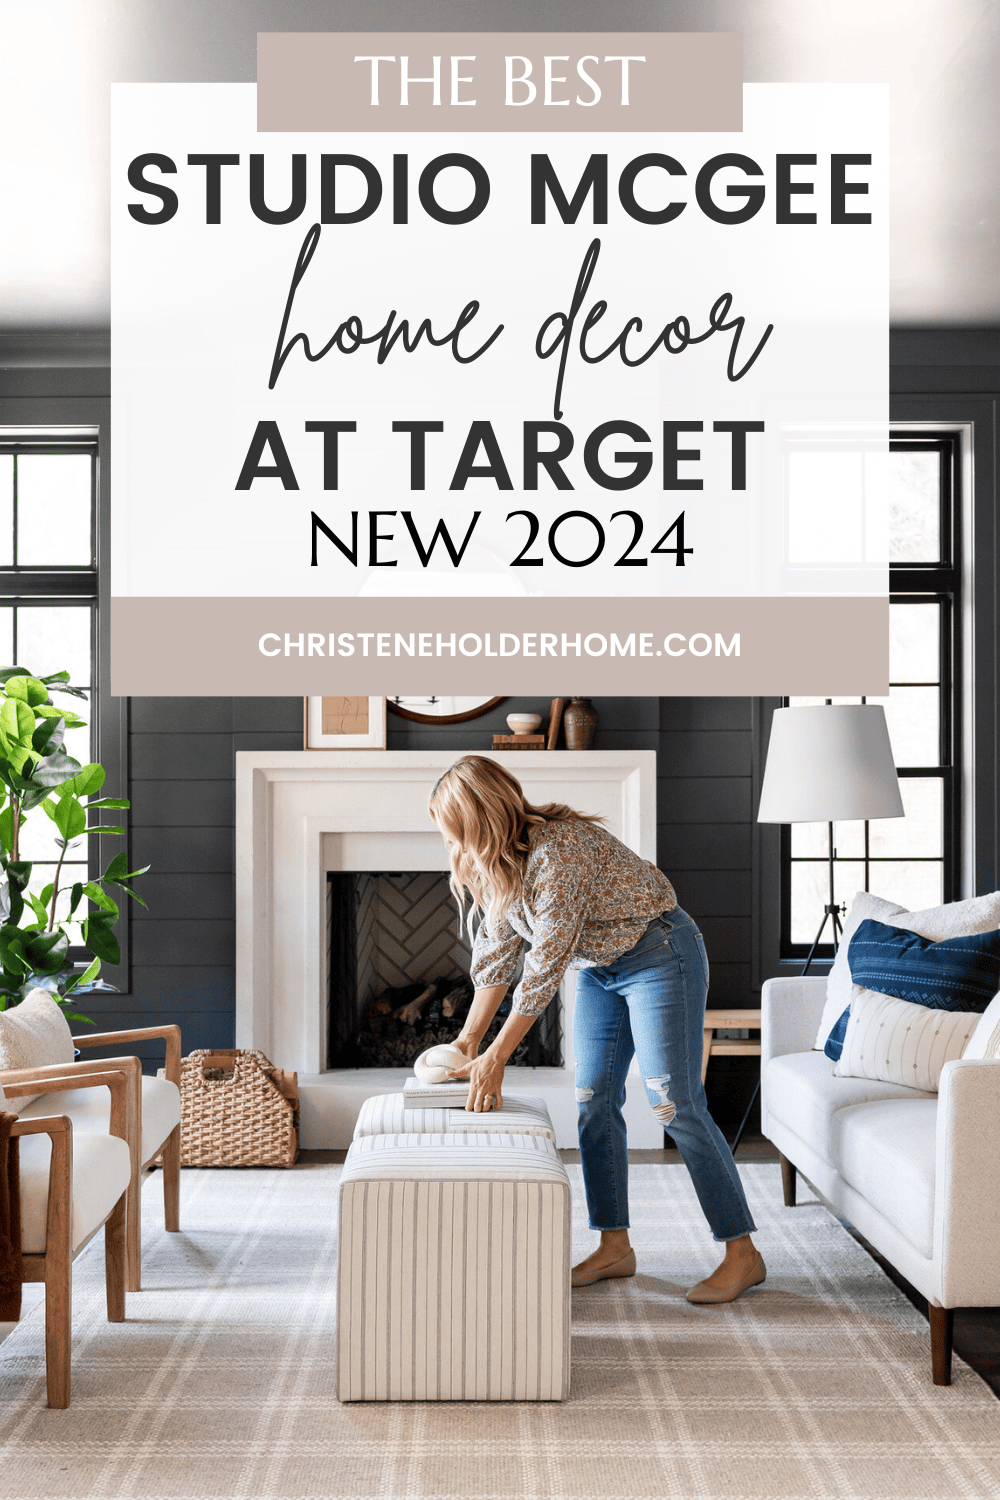 https://www.christeneholderhome.com/wp-content/uploads/2023/01/The-Best-Studio-McGee-Home-Decor-at-Target-2024.png